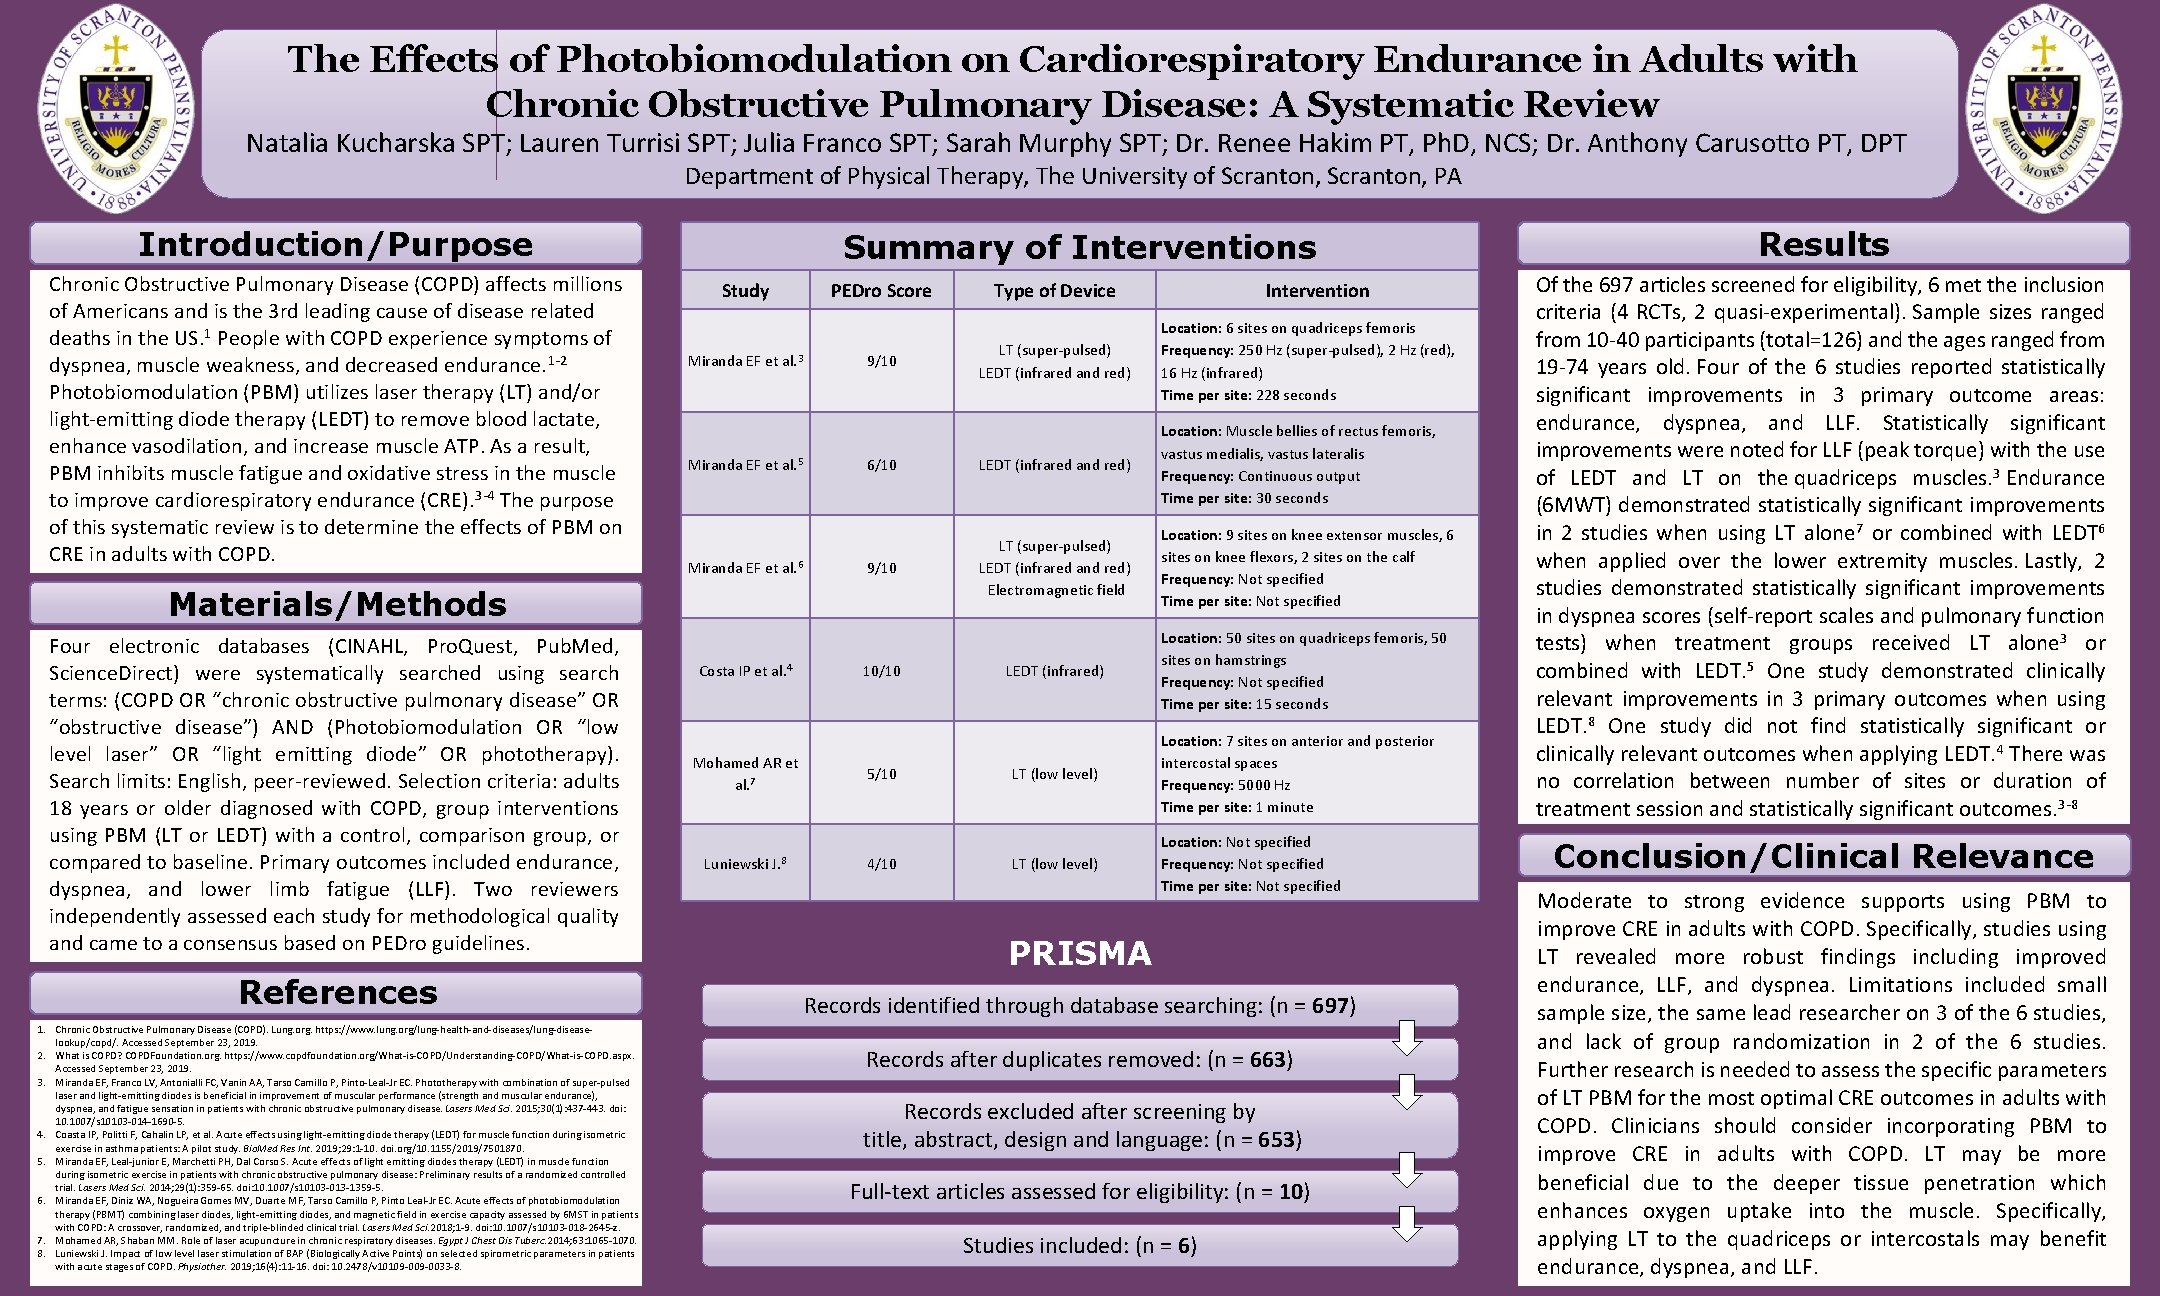 The Effects of Photobiomodulation on Cardiorespiratory Endurance in Adults with Chronic Obstructive Pulmonary Disease: